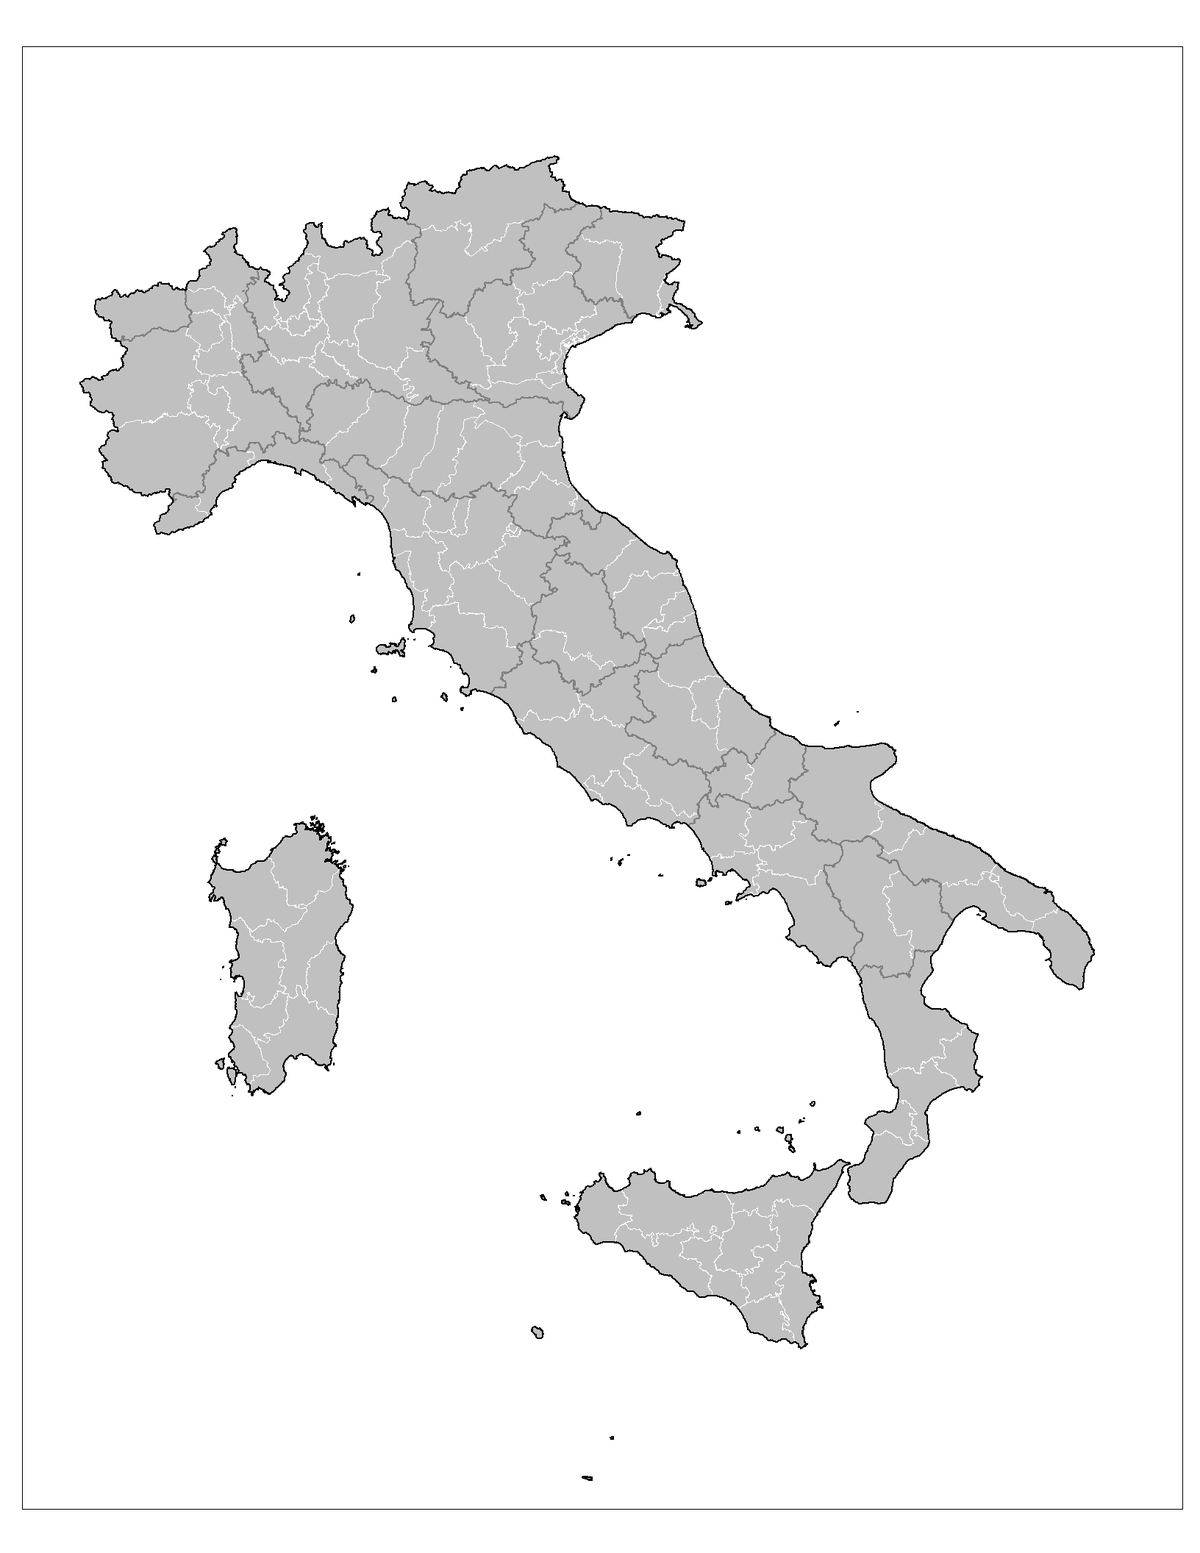 Italy provinces.png